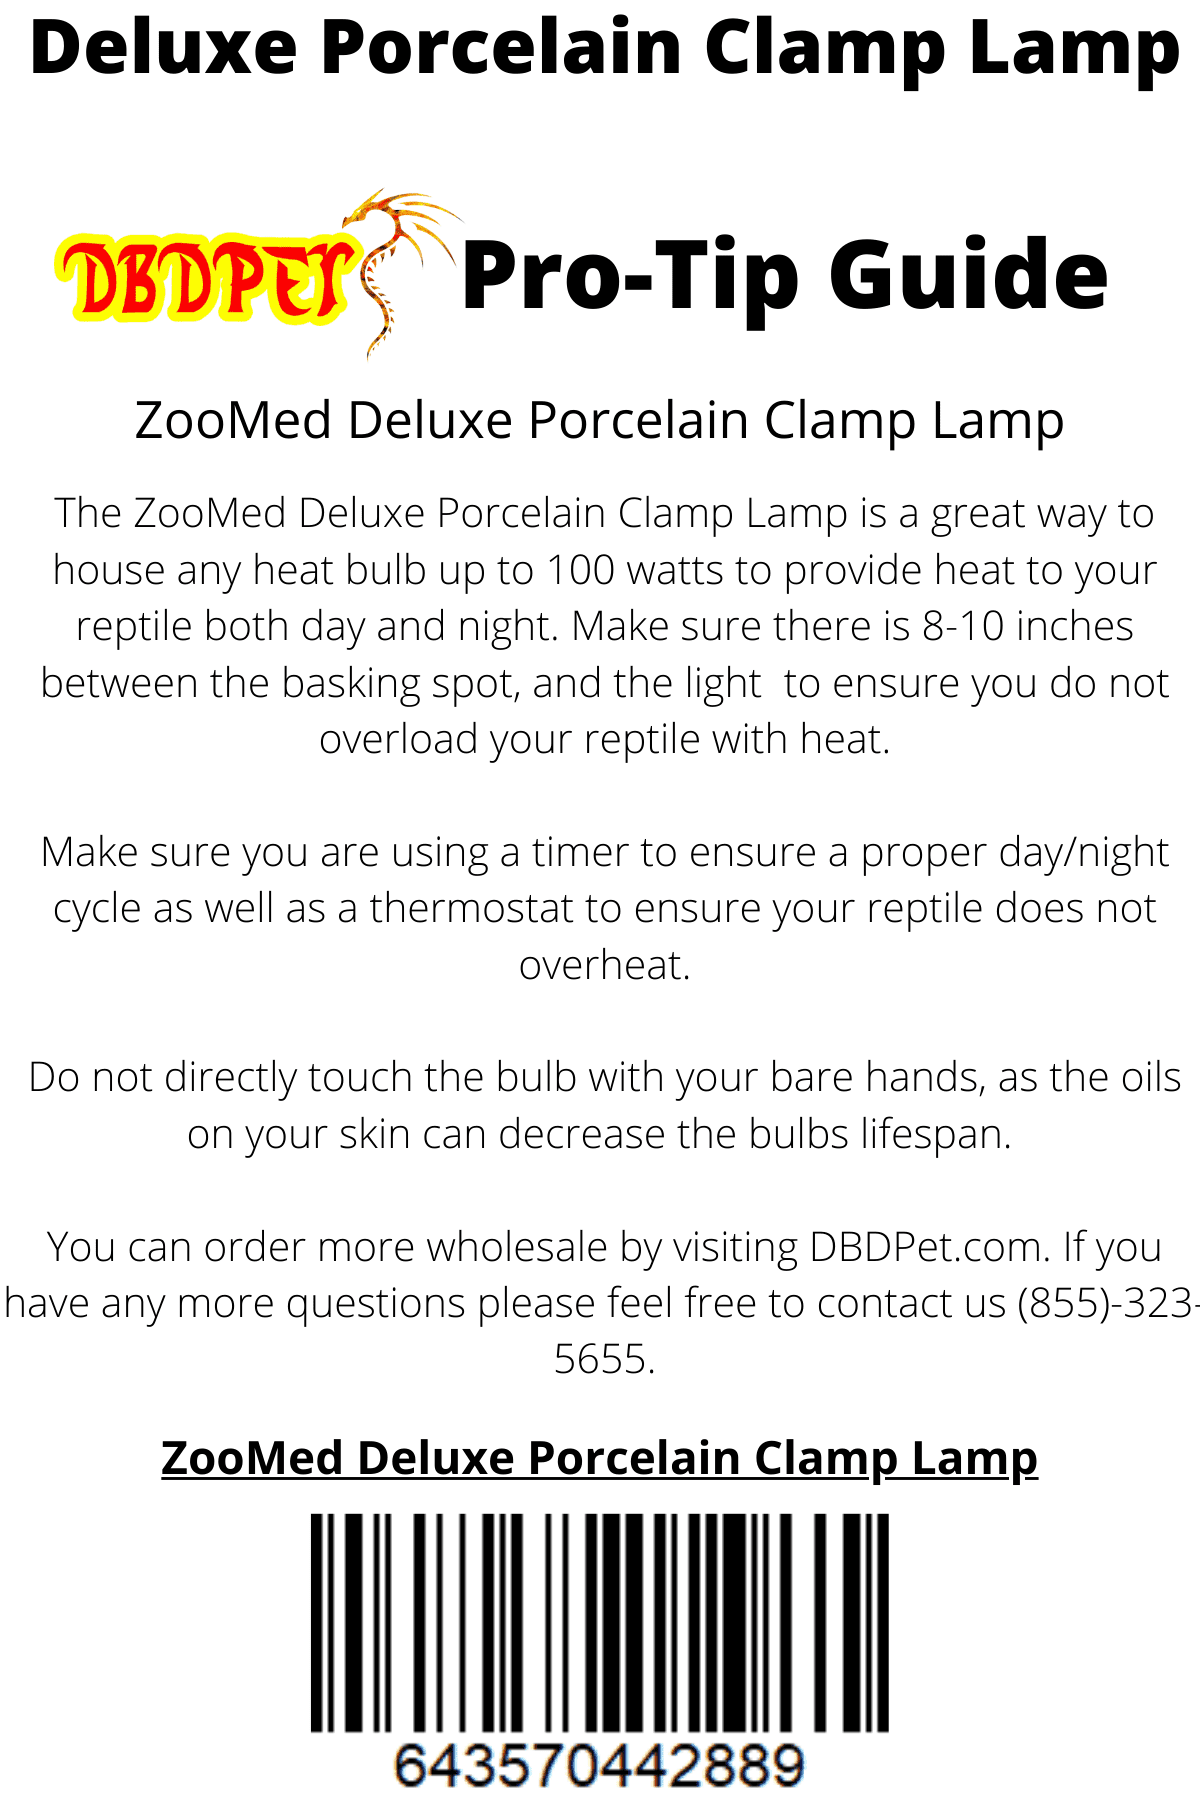 5.5 Reptile Deluxe Porcelain Clamp Lamp 100w Maximum Includes Attached DBDPet Pro-Tip Guide 